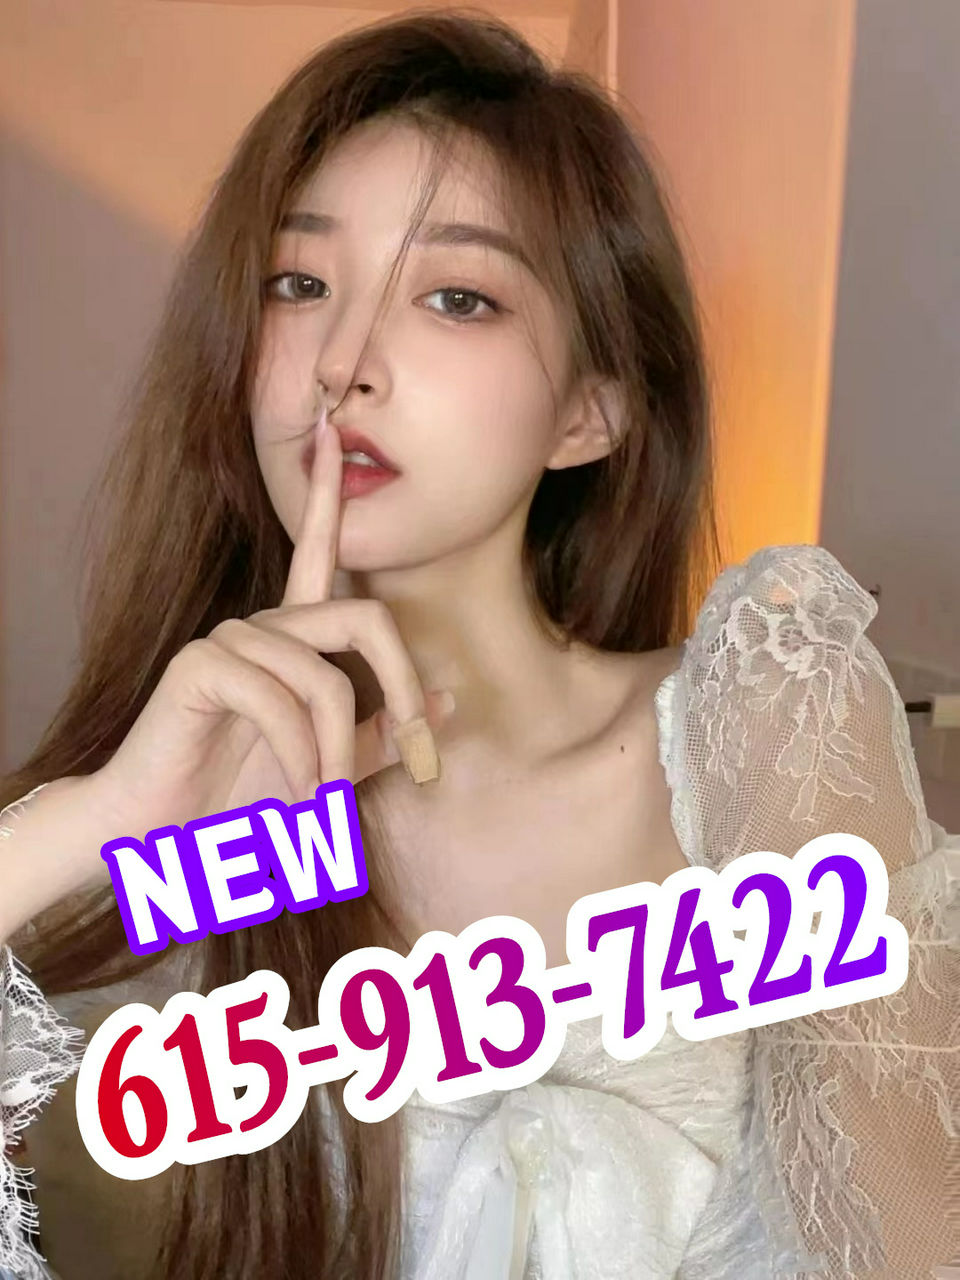 Escorts Nashville, Tennessee 💃💃💃🟩🟩🟩GRAND OPENING & NEW LADY💃💃💃 🔥🟩🟩🟩100% sweet and Cute🟩🟩🟩